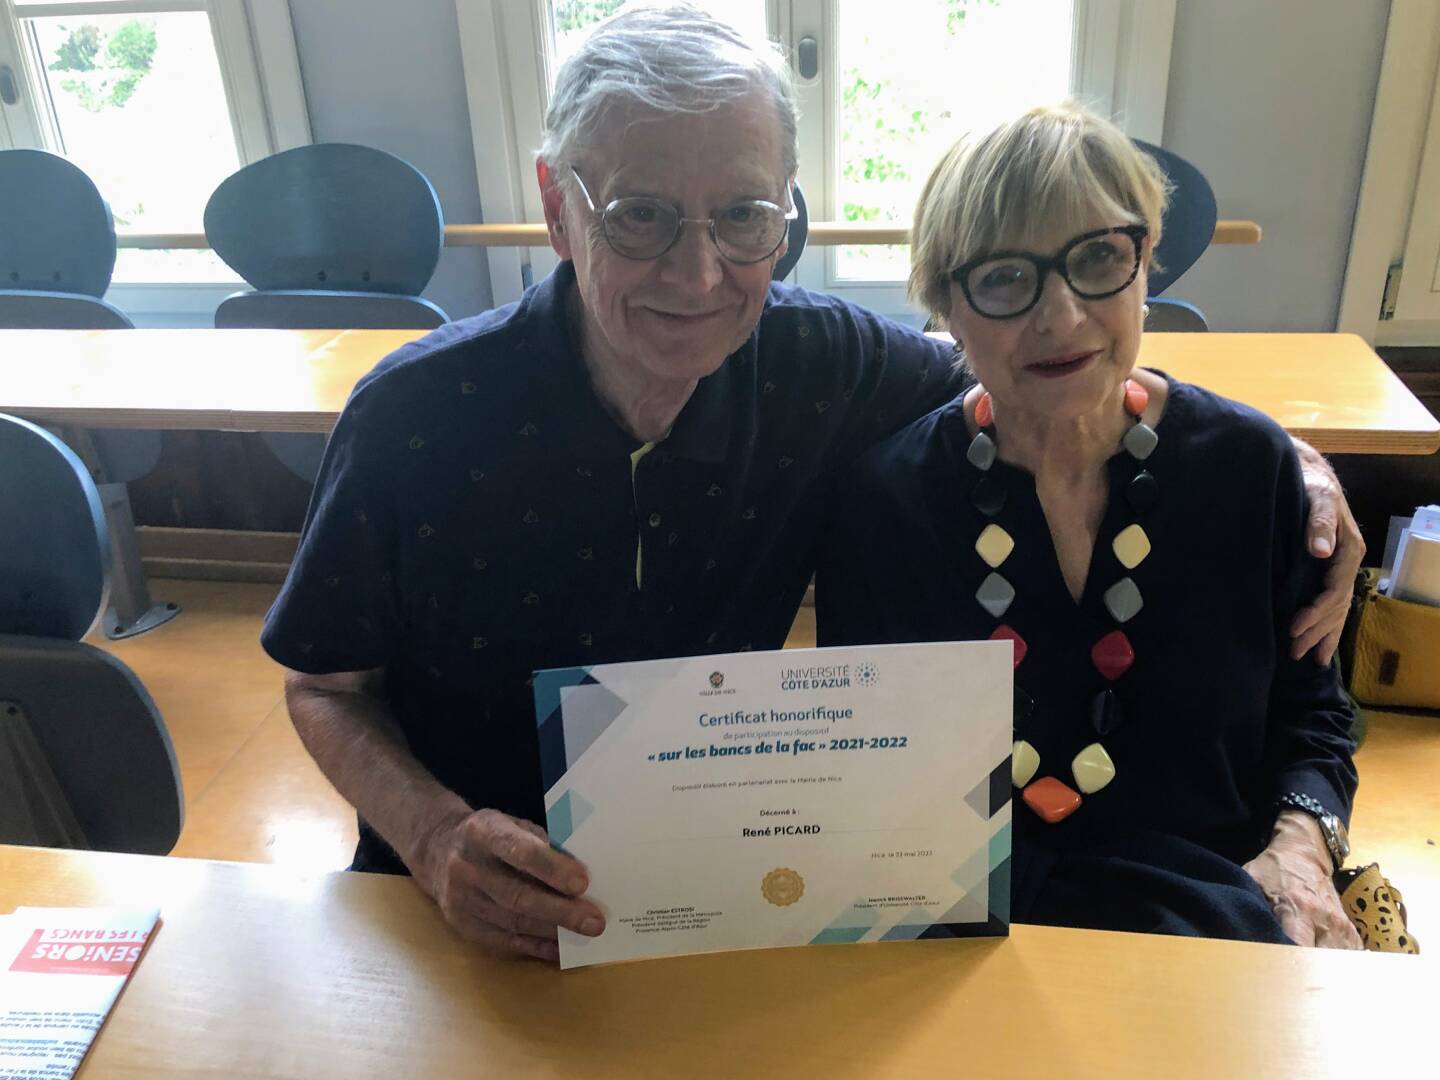 René Picard, 80, took a law course in the 2021-2022 school year at the University of the Côte d’Azur.  University of Côte d’Azur René Picard, 80, took a law course in the 2021-2022 school year at the University of Côte d’Azur.